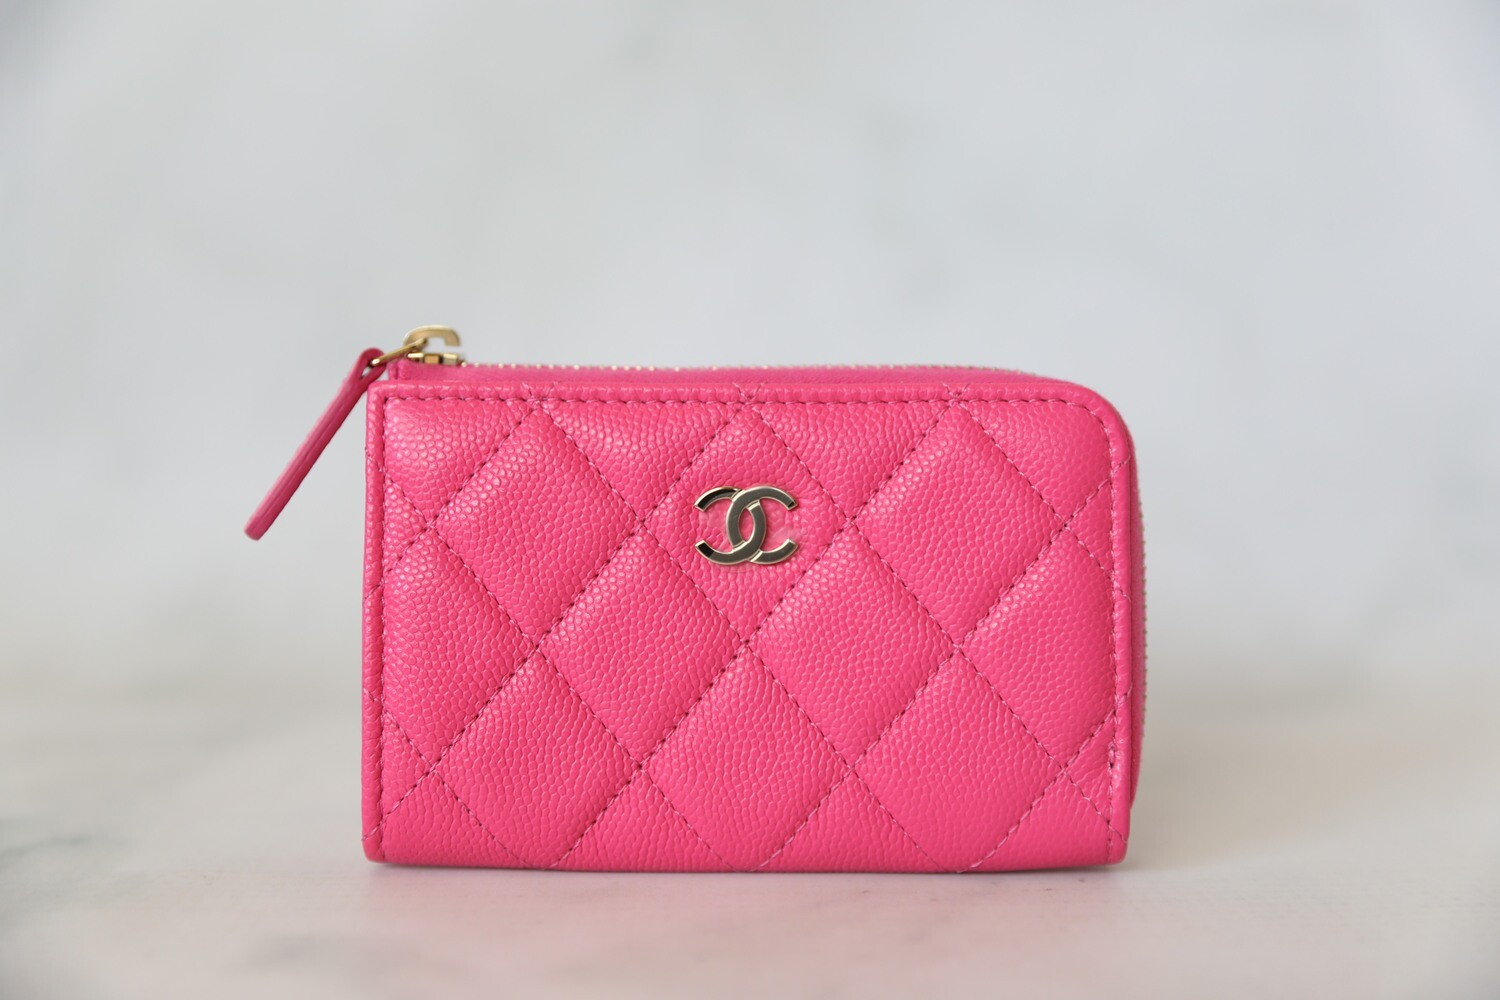 Chanel Zip Key and Card Holder, Pink Caviar with Gold Hardware, New in Box  WA001 - Julia Rose Boston